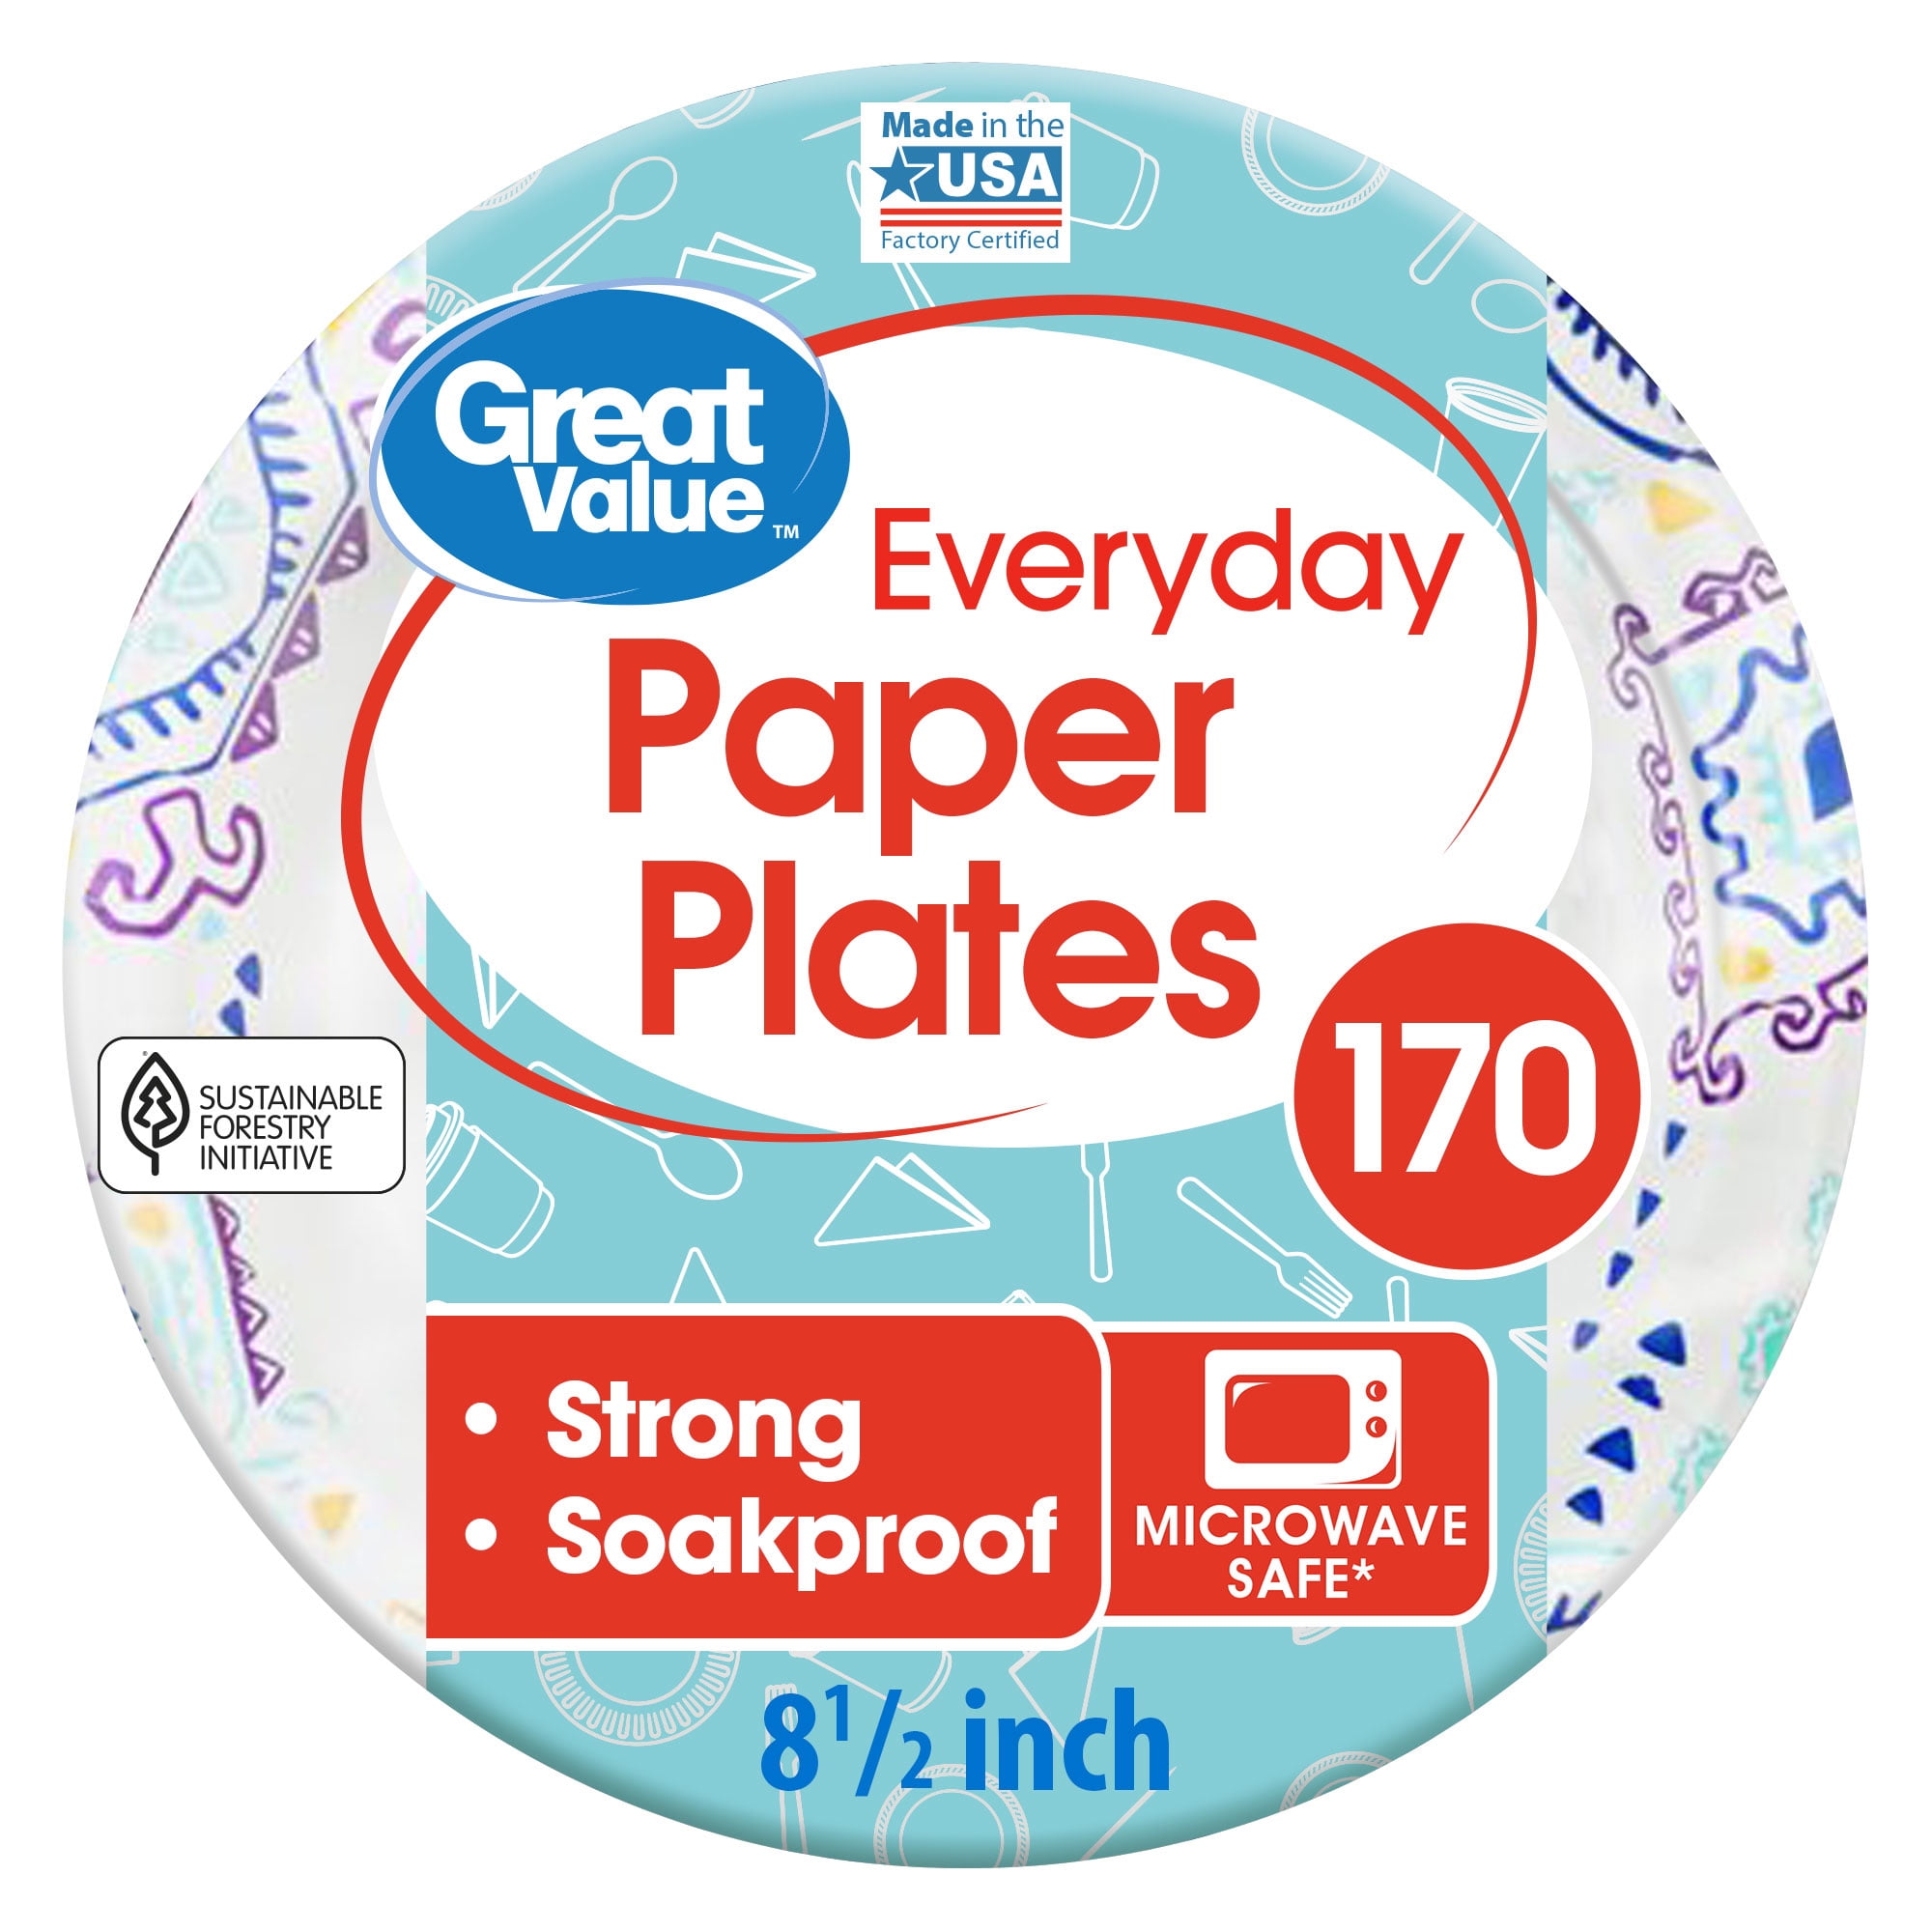 Great Value Everyday Paper Plates, 8.5, 170 Count